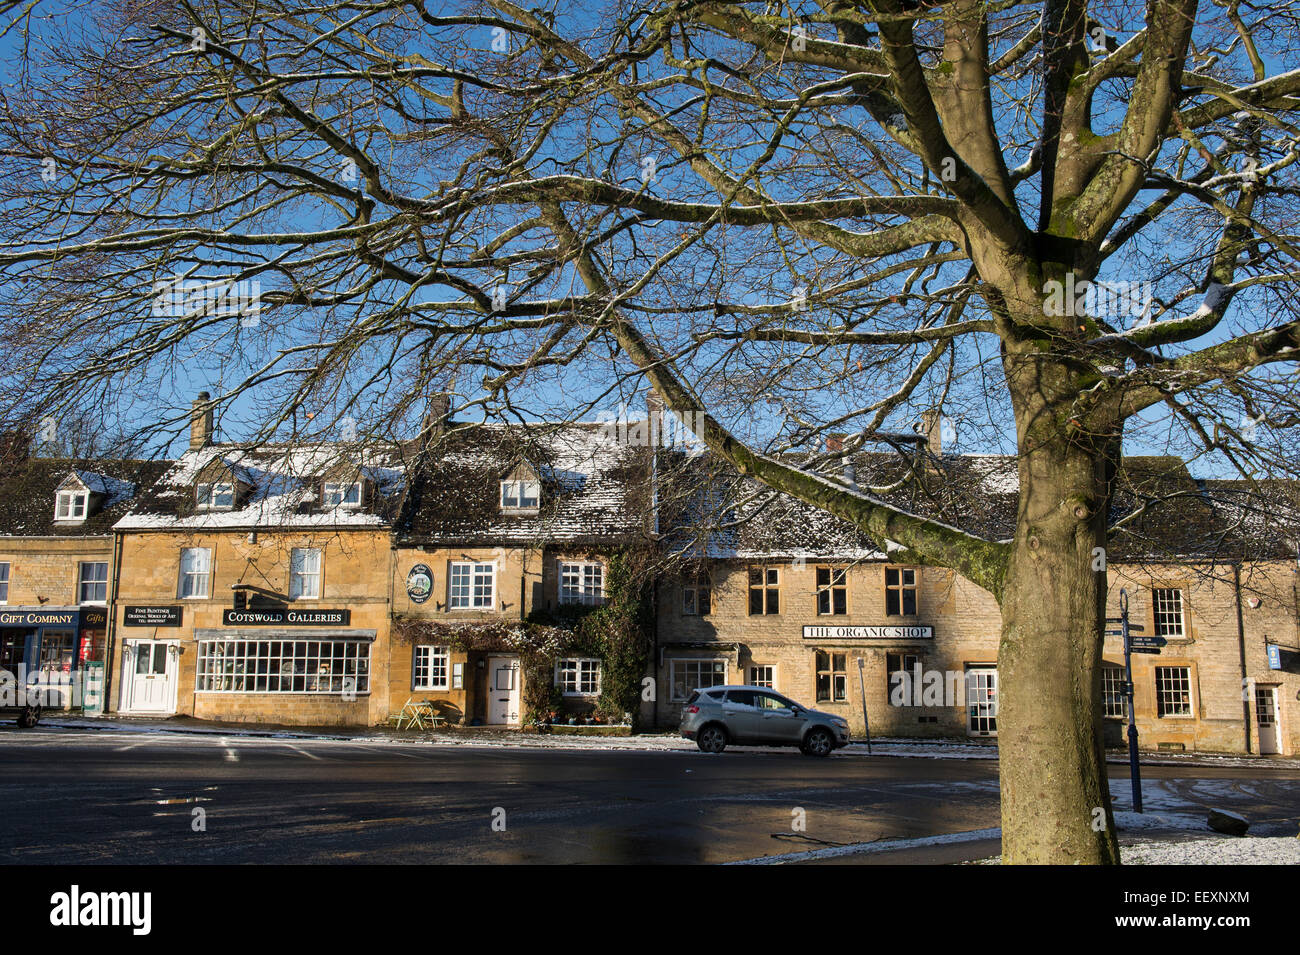 Winter in Stow On the Wold, Cotswolds, Gloucestershire, England Stock Photo